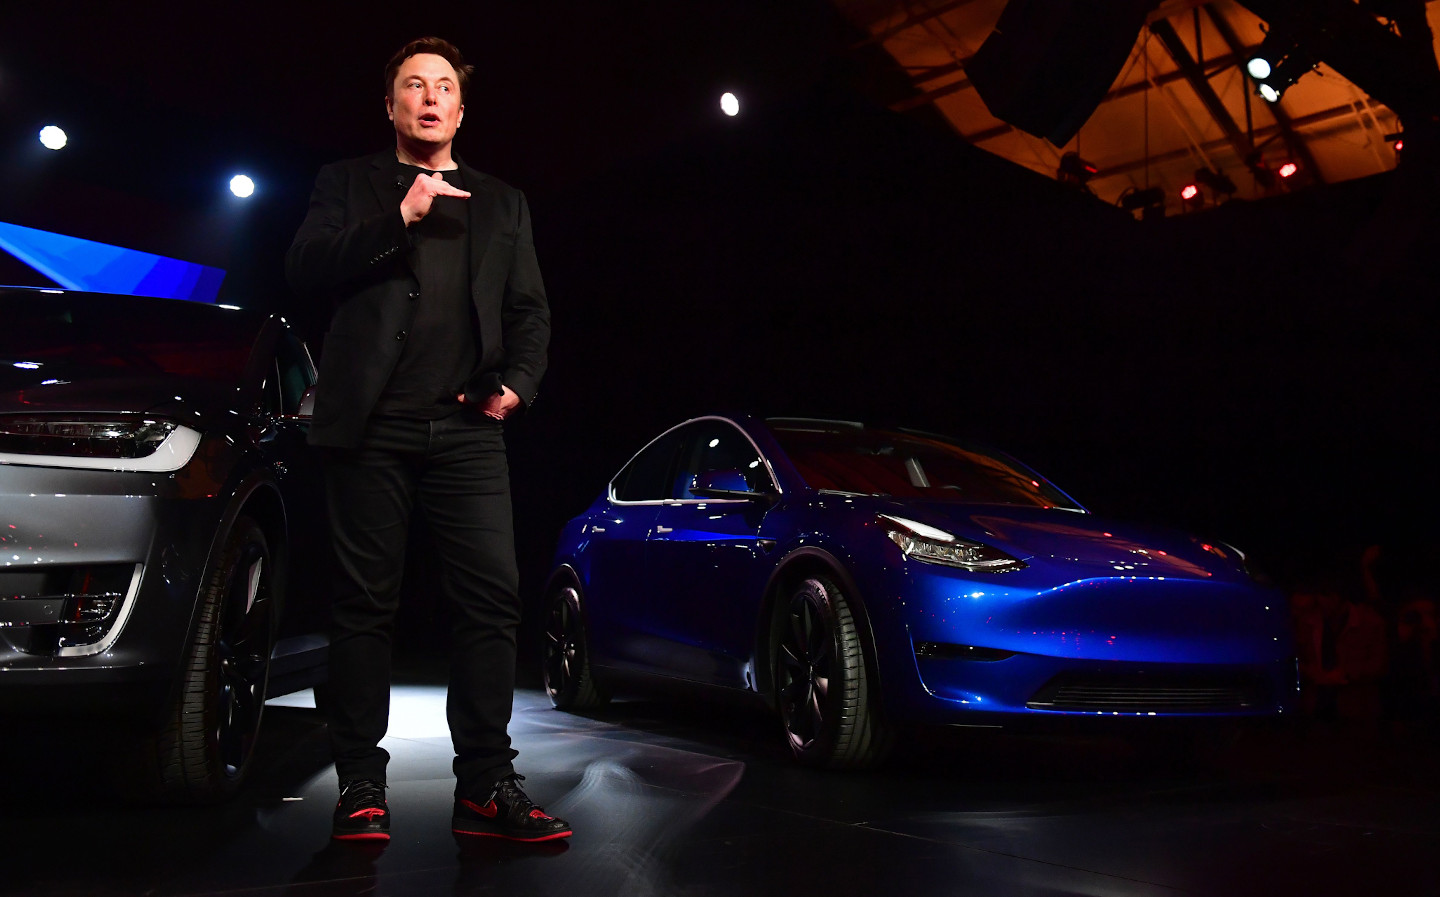 Tesla is the world’s most valuable car company